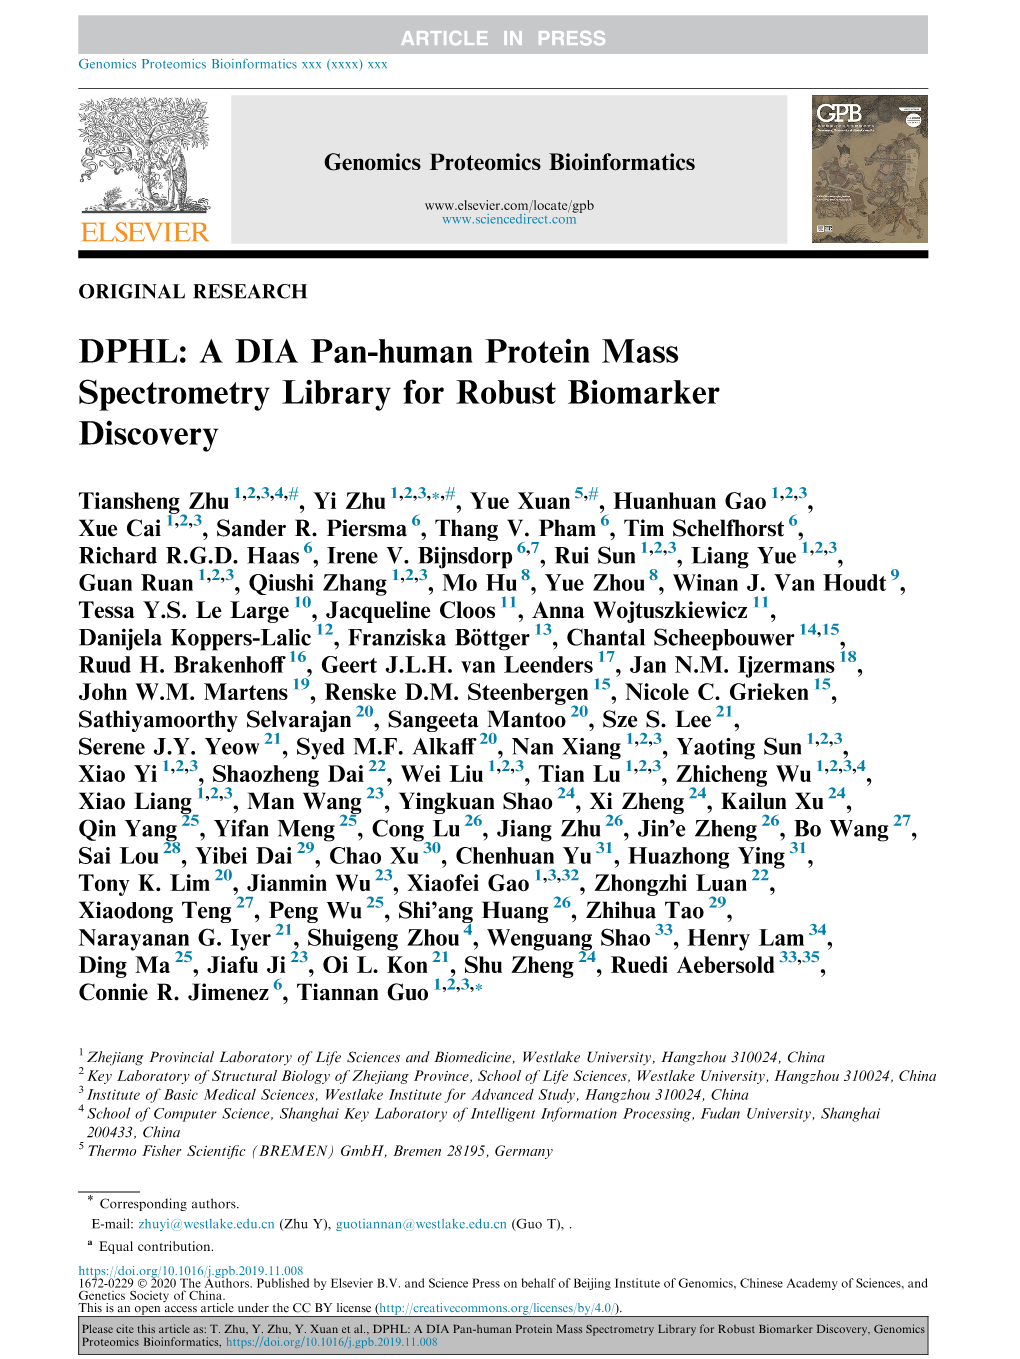 A DIA Pan-Human Protein Mass Spectrometry Library for Robust Biomarker Discovery